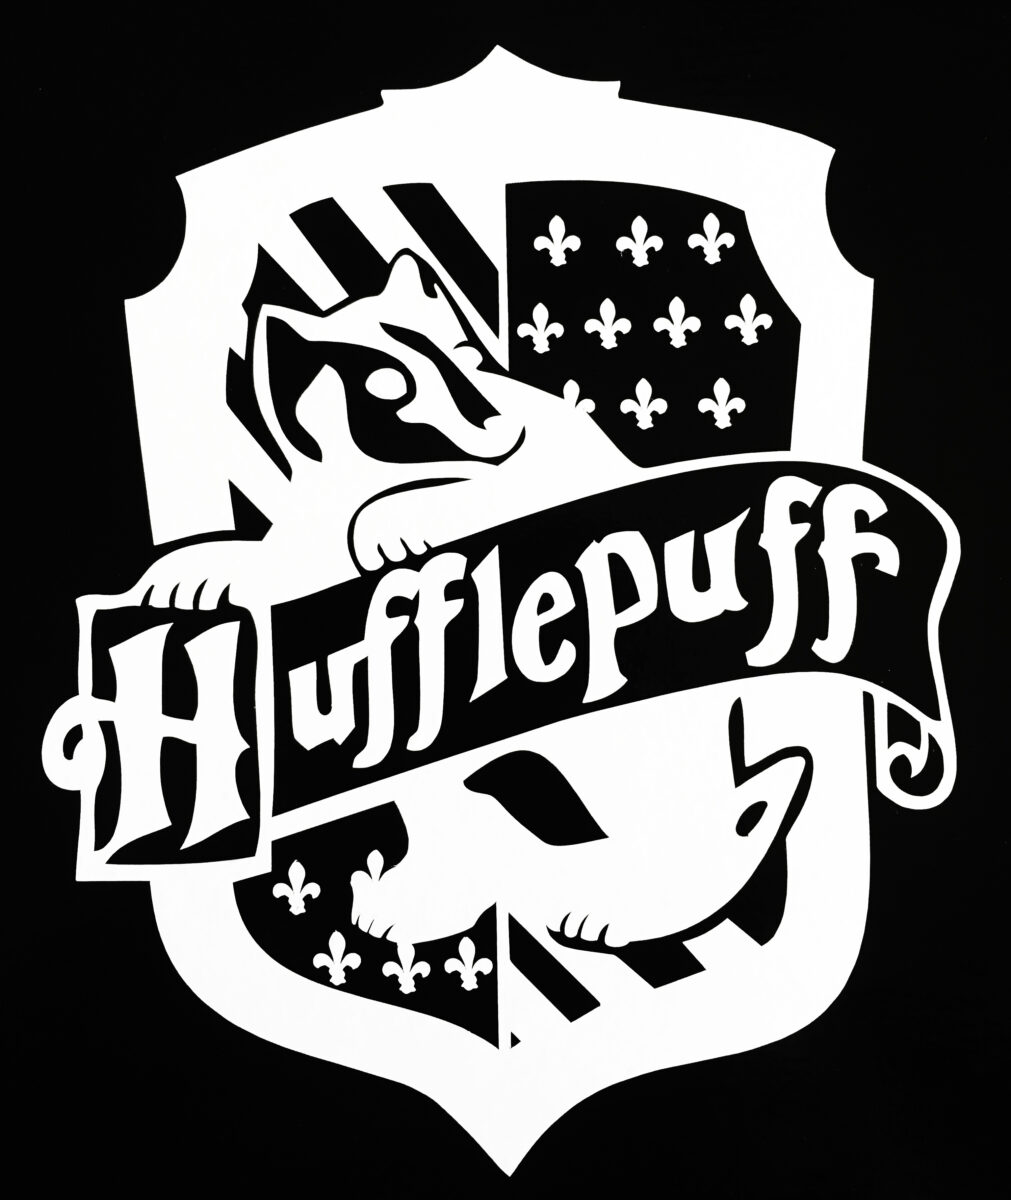 How Relevant Are the Hufflepuff and Ravenclaw Houses in Harry Potter?